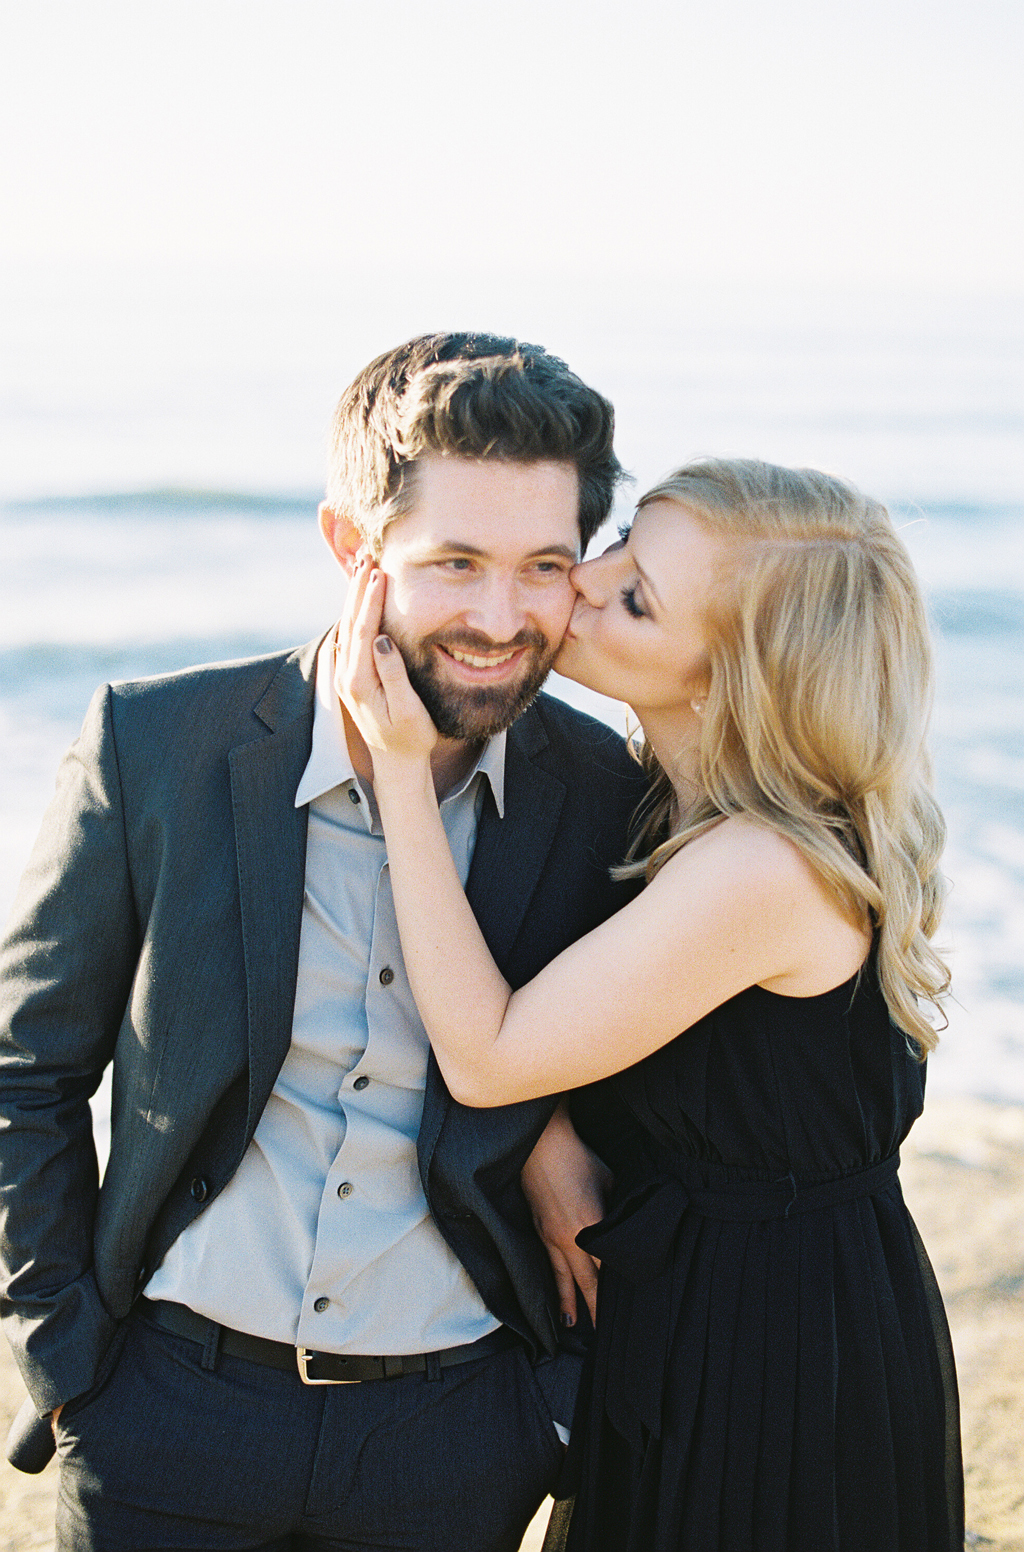 a soon-to-be bride kissed her fiance during their coastal engagement session in San Diego.